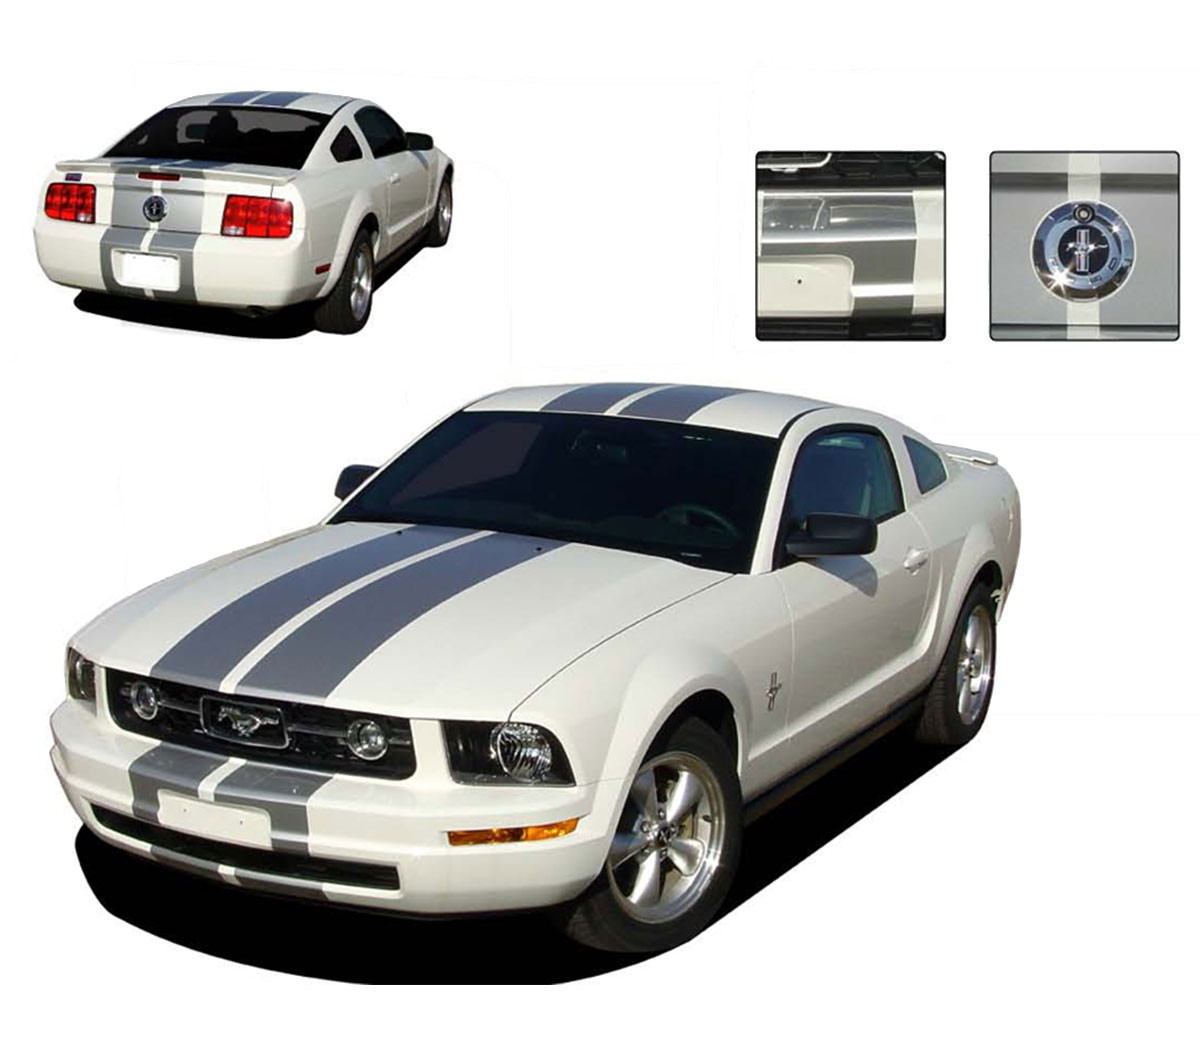 Fastback 2 Boss Hood Side Stripes 3M Vinyl Graphic Decal 2005-2009 Ford Mustang 